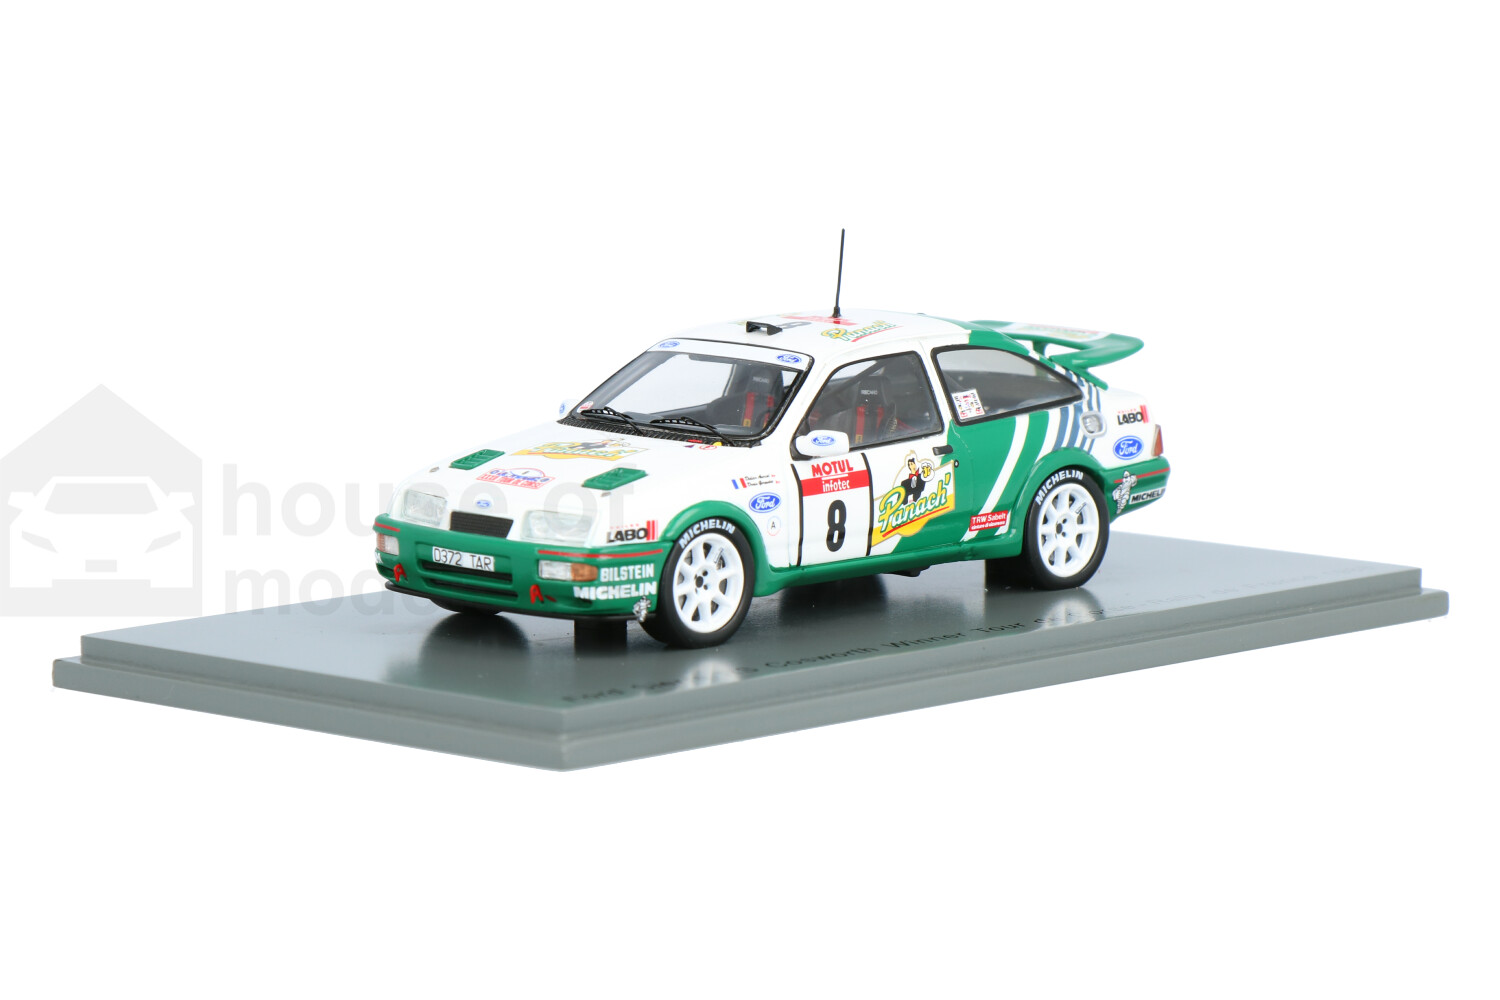 Ford-Sierra-RS-Cosworth-S2626_13159580006926265-SparkFord-Sierra-RS-Cosworth-S2626_Houseofmodelcars_.jpg